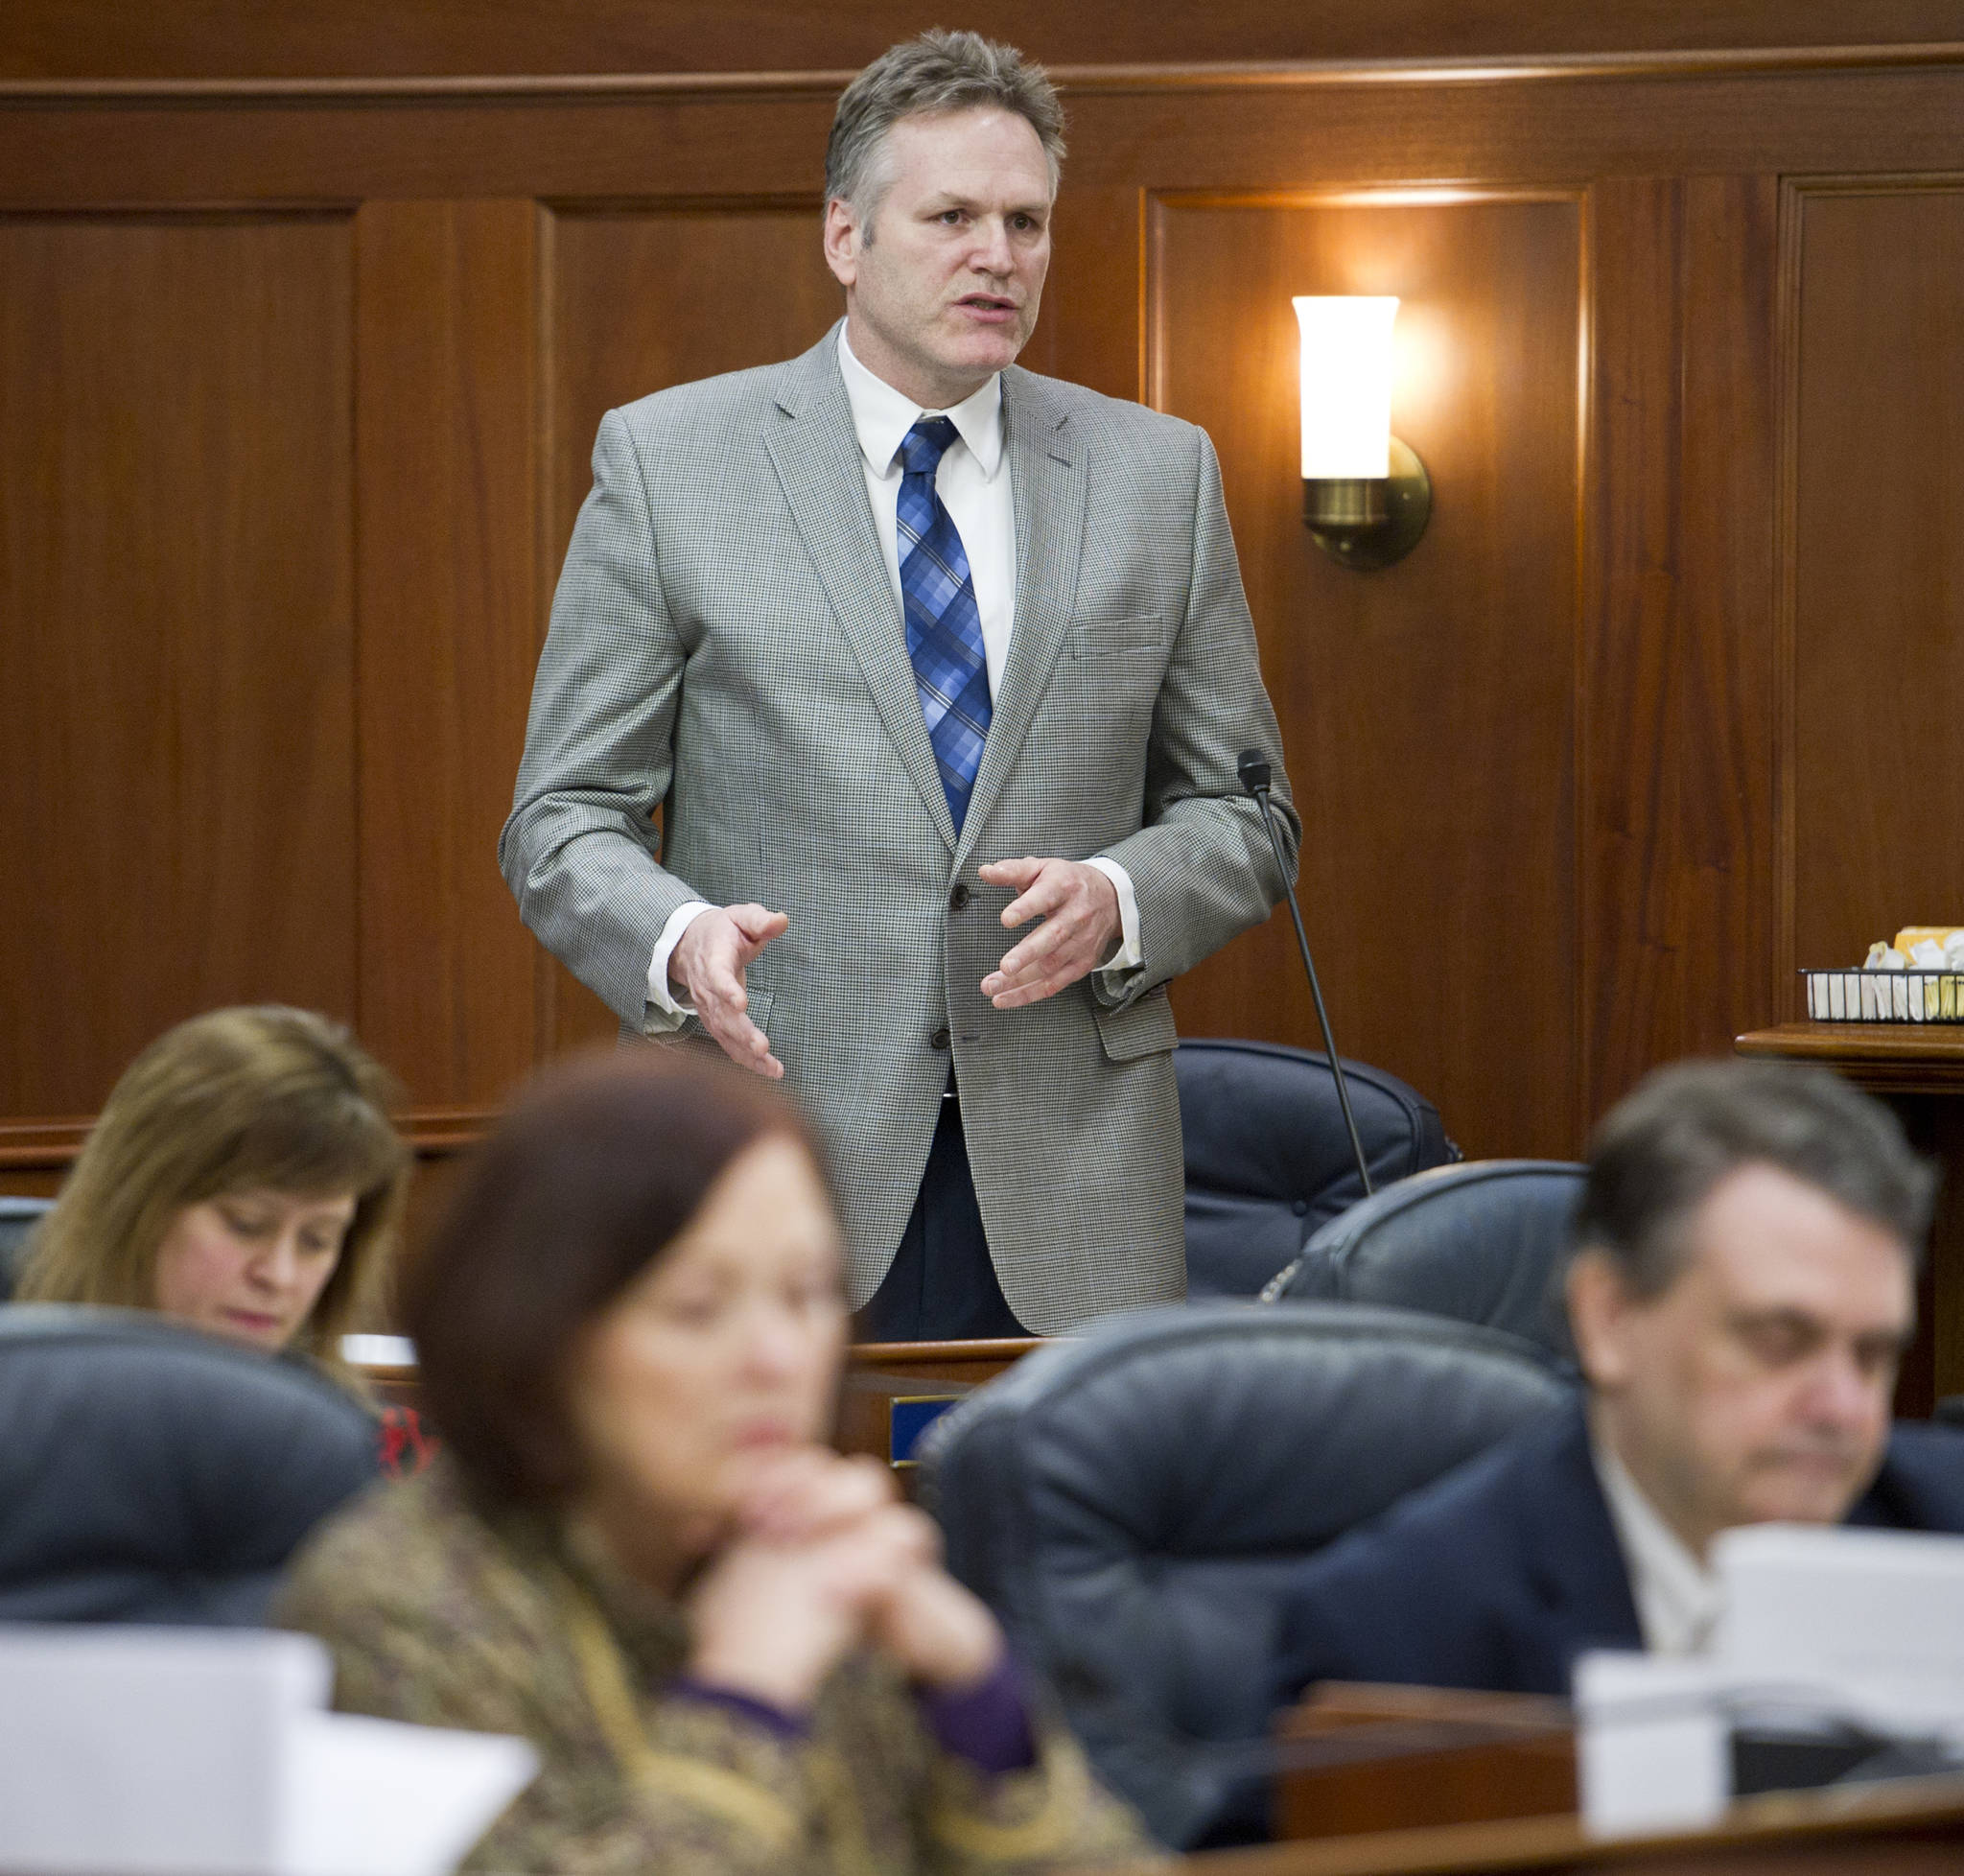 In this February 2016 photo, Sen. Mike Dunleavy, R-Wasilla, speaks in support of his bill, SB 89, that would prohibit a school district from contracting with an abortion services provider or allowing them to furnish course materials or instruction concerning sexuality or sexually transmitted diseases. The bill passed on a 11-7 vote. (Michael Penn | Juneau Empire File)